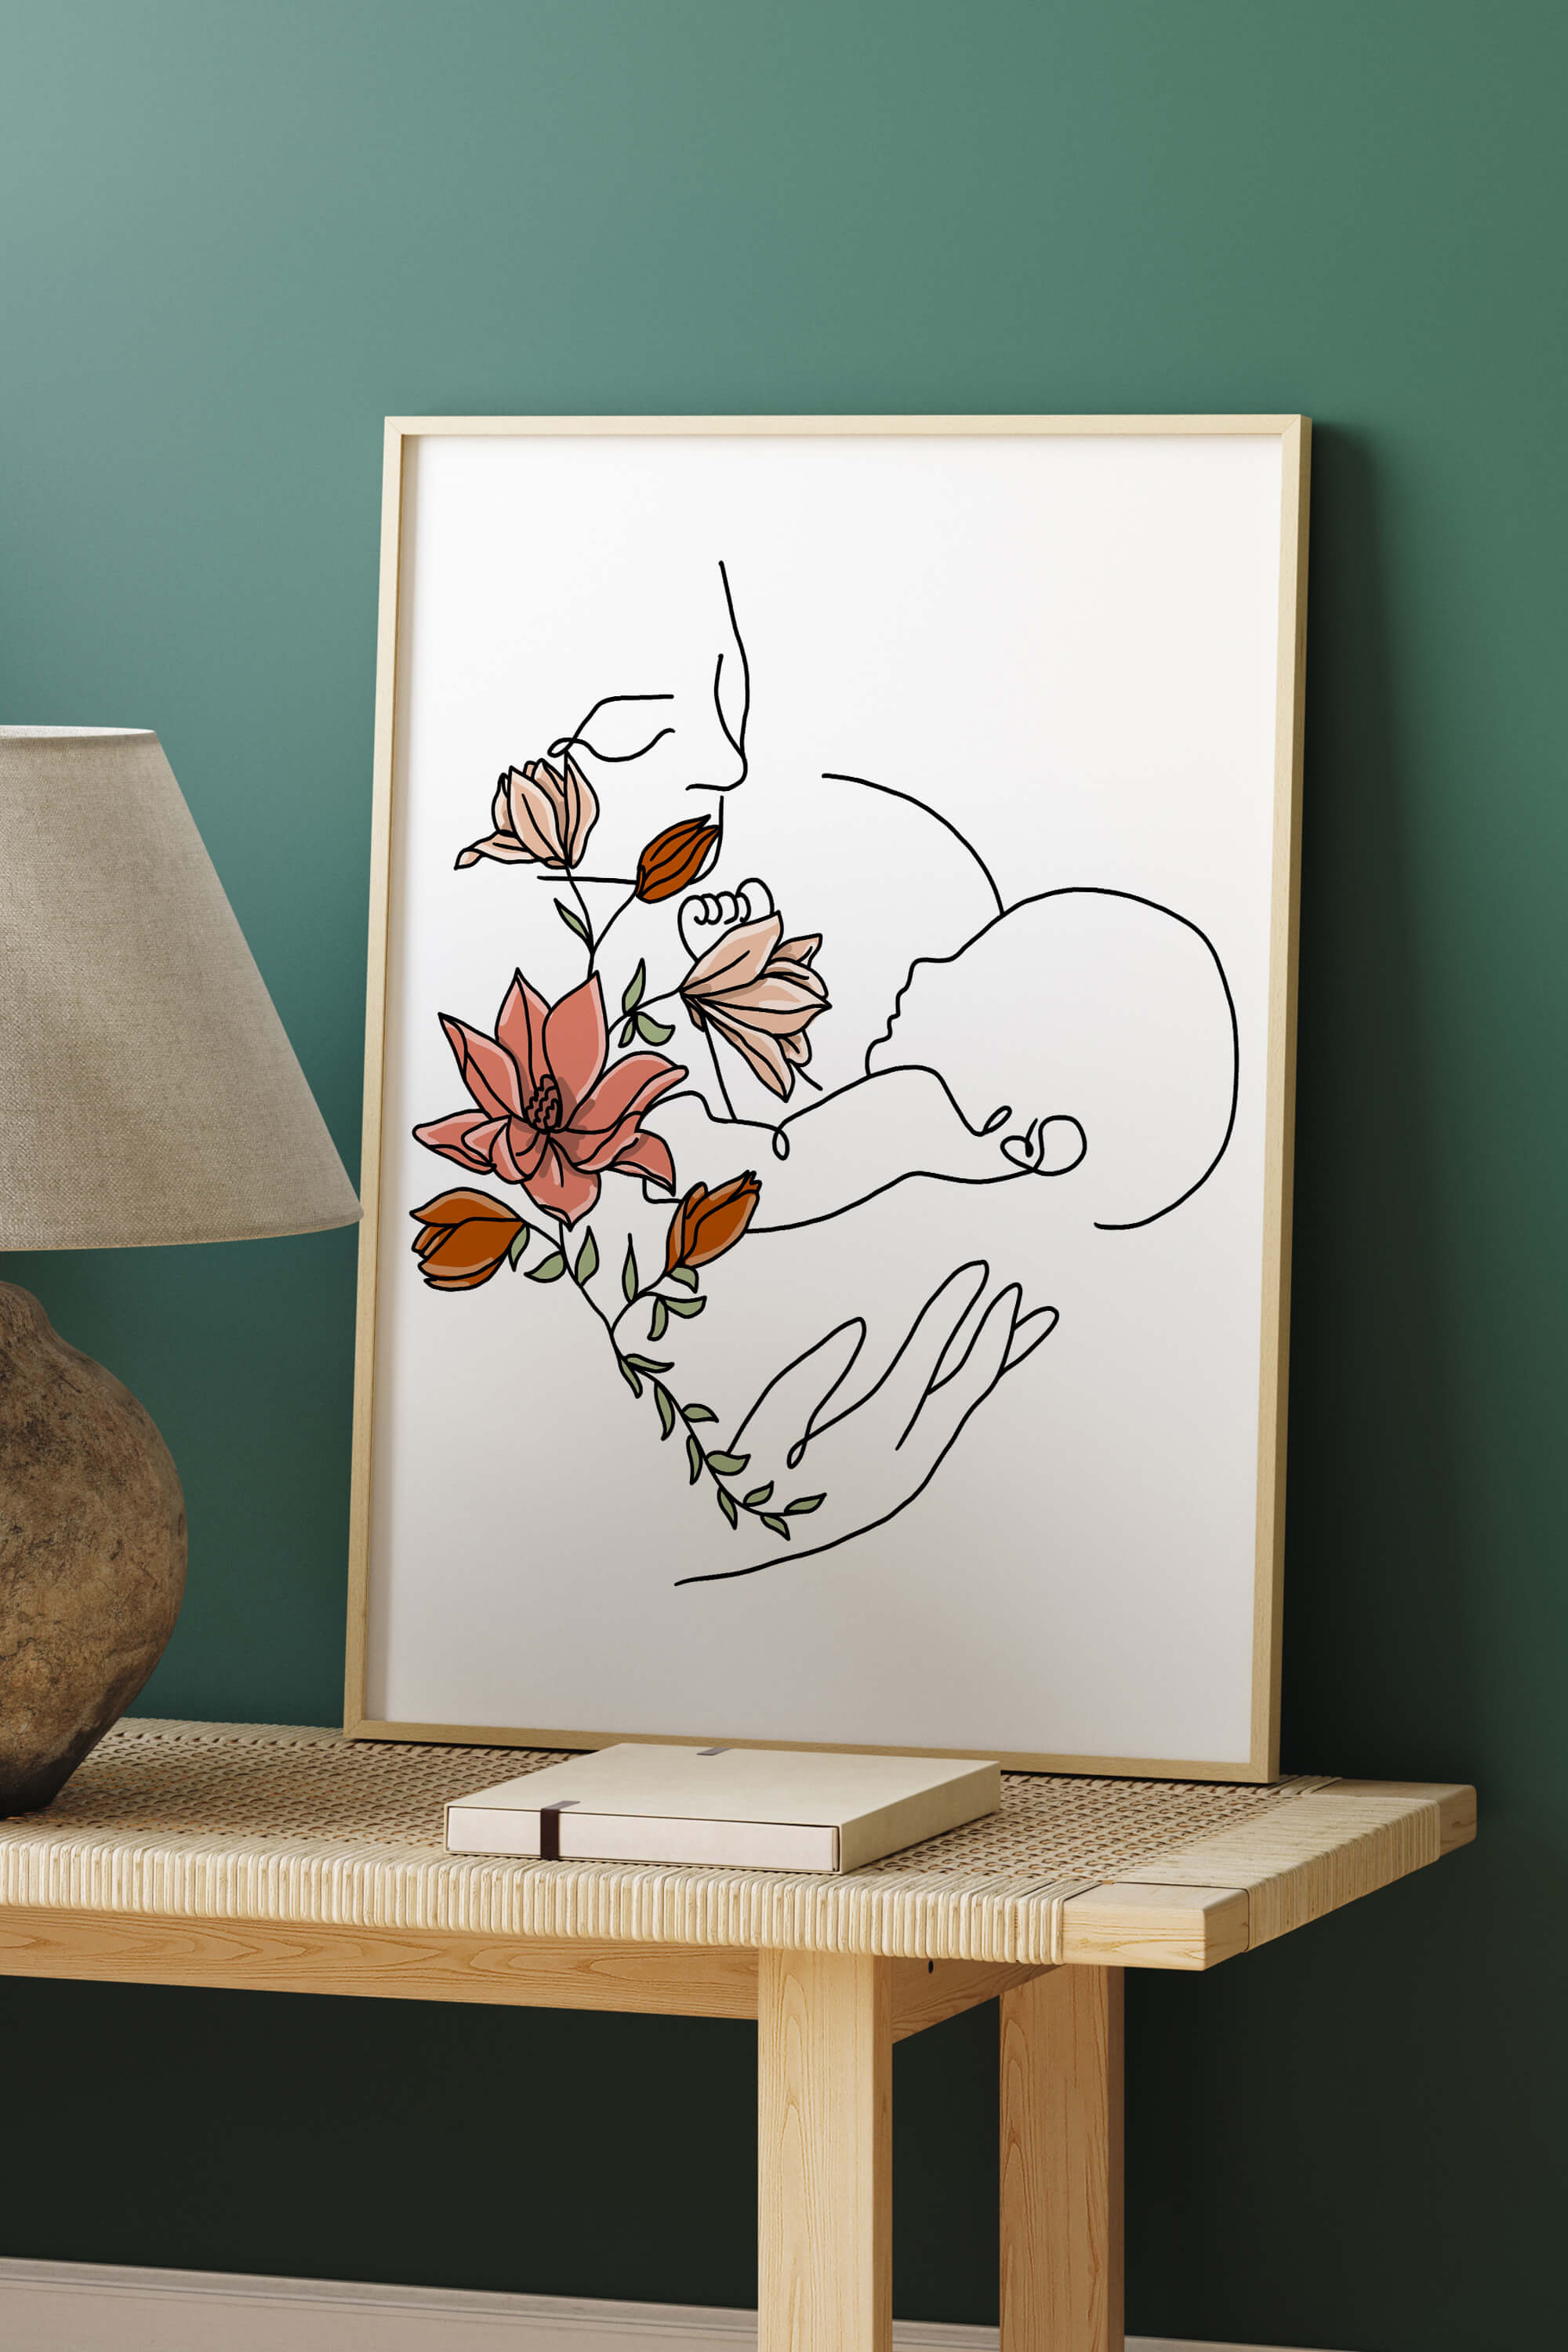 Capture the essence of motherhood with this radiant art piece. Blossom with joy as you embark on the journey of motherhood. Cultural symbols intertwined with the radiance of maternity.